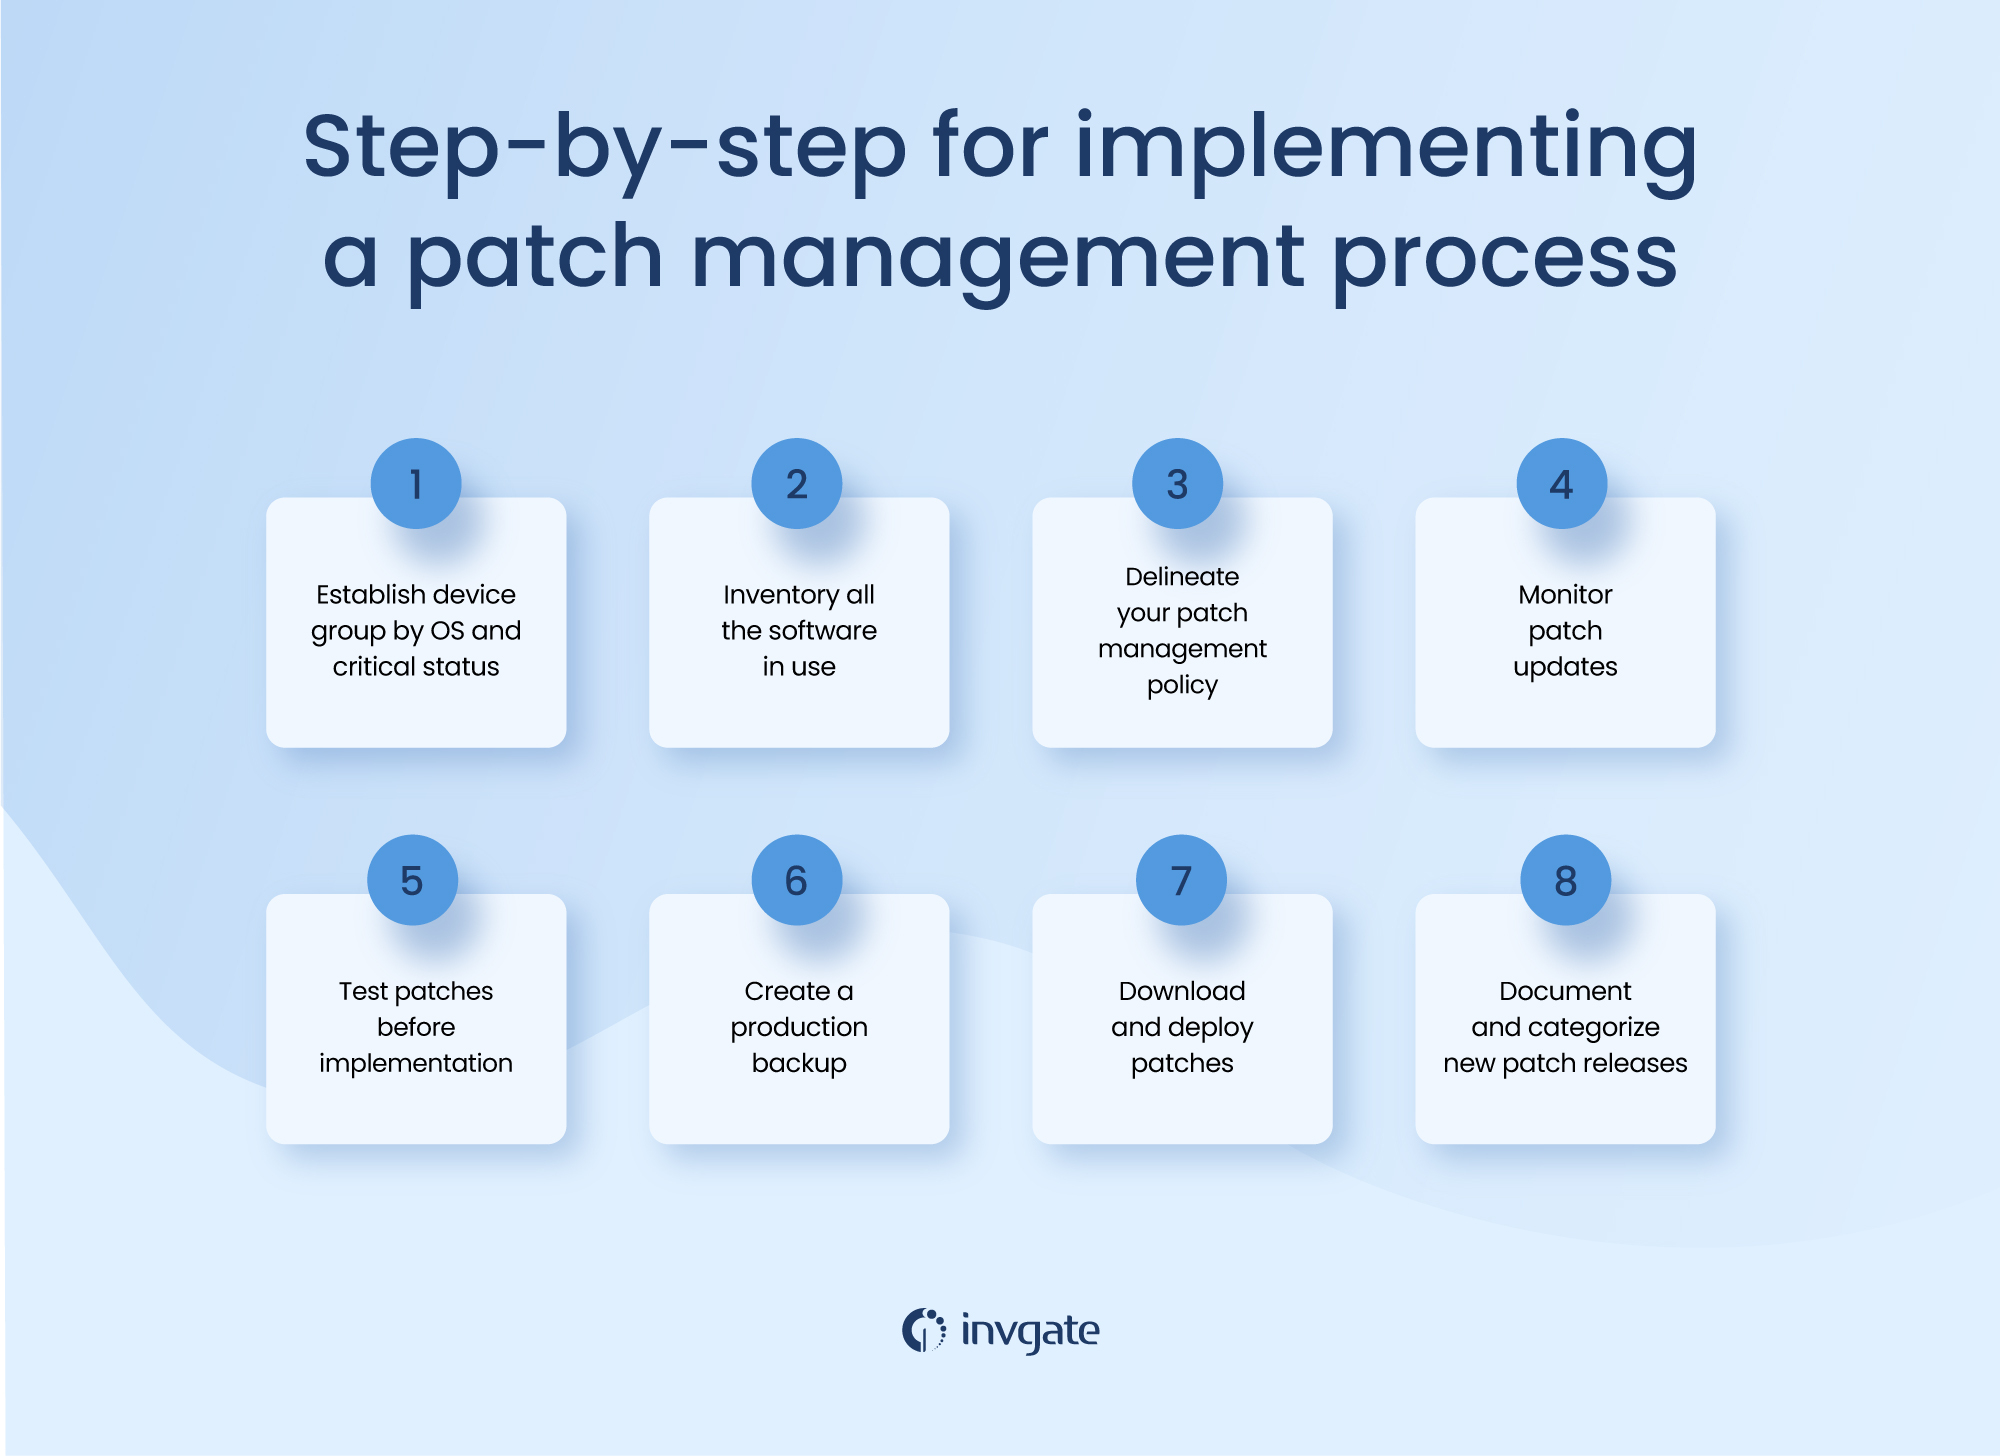 Identifying a Patch Management Solution: Overview of Key Criteria